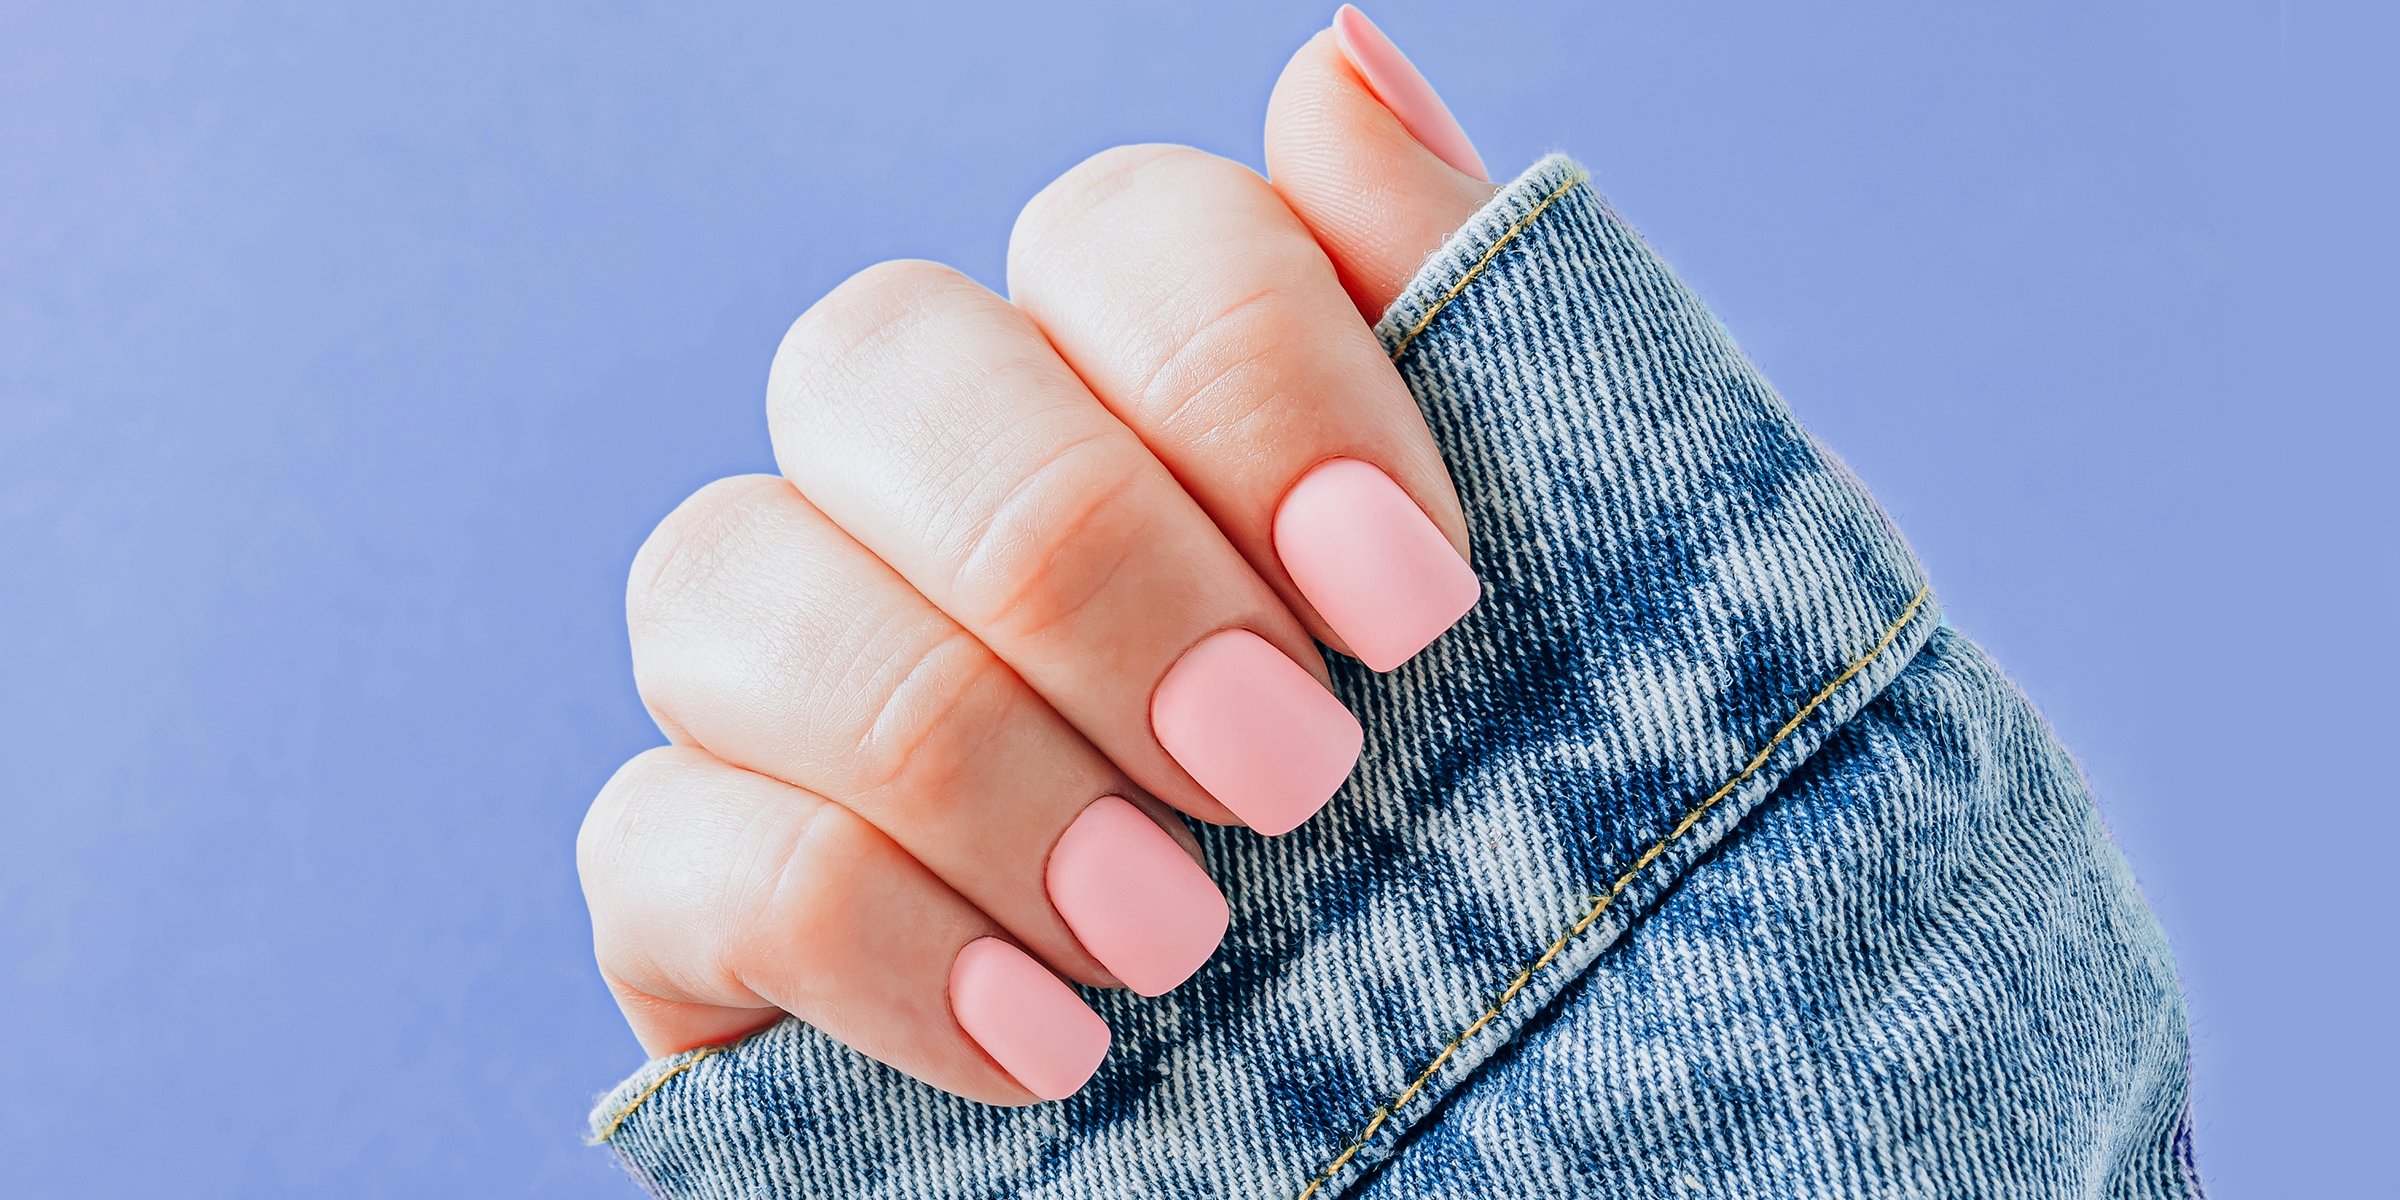 Wide nails with pink polish | Source: Shutterstock